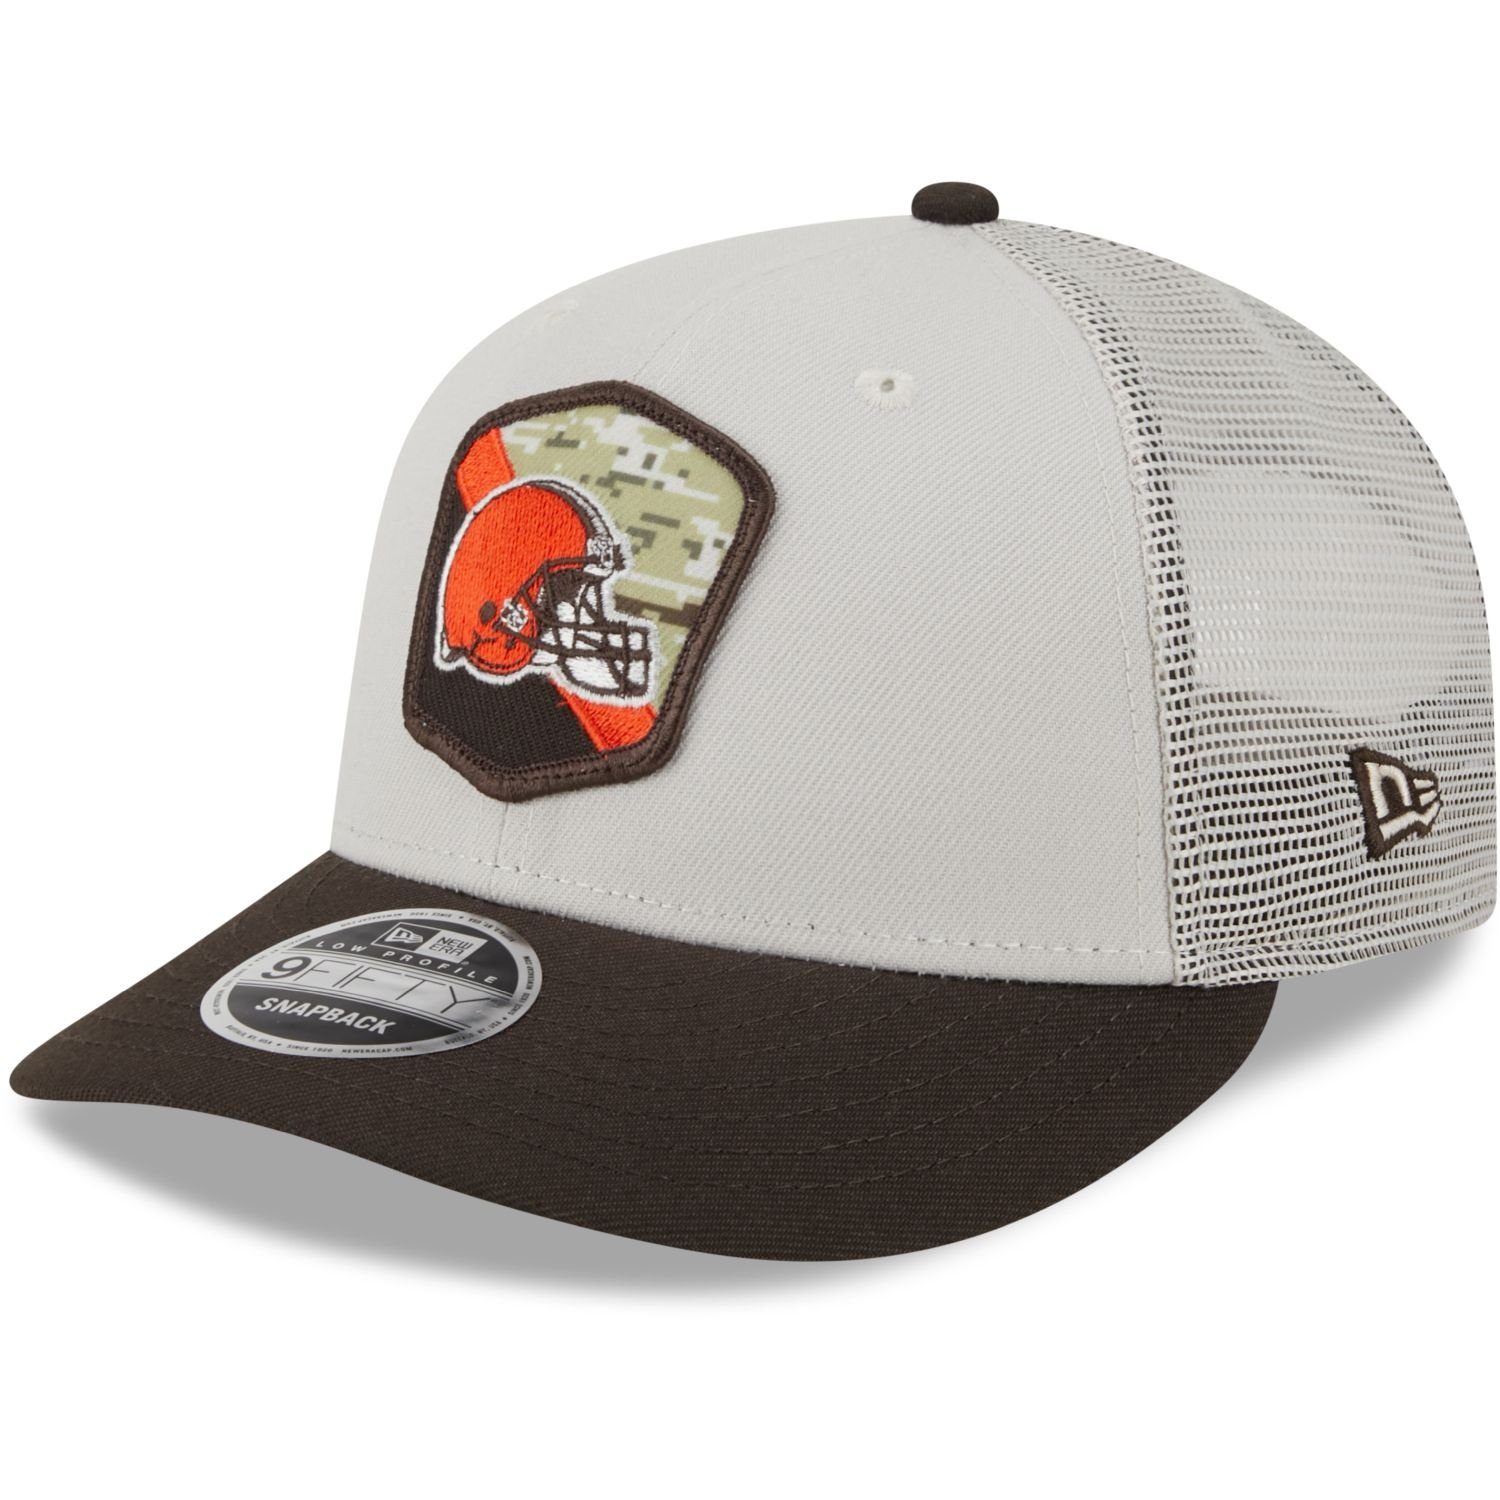 Salute New to Service Snapback Profile Era Low Snap Cleveland Cap 9Fifty Browns NFL